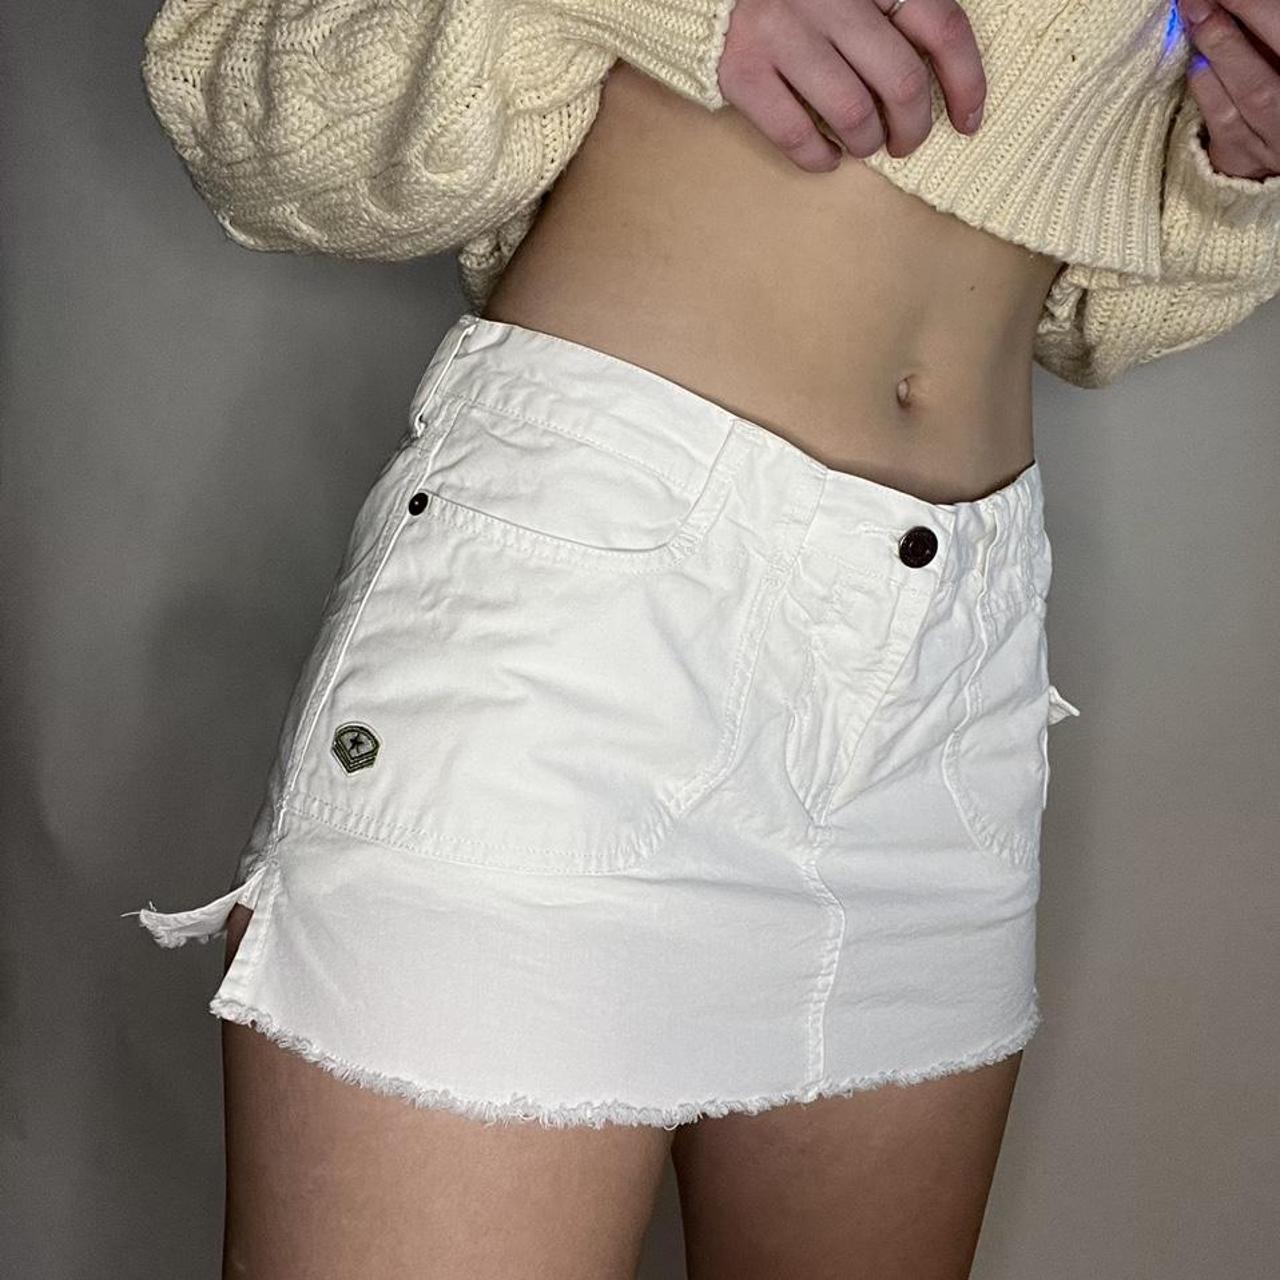 Abercrombie & Fitch Women's White Skirt (2)